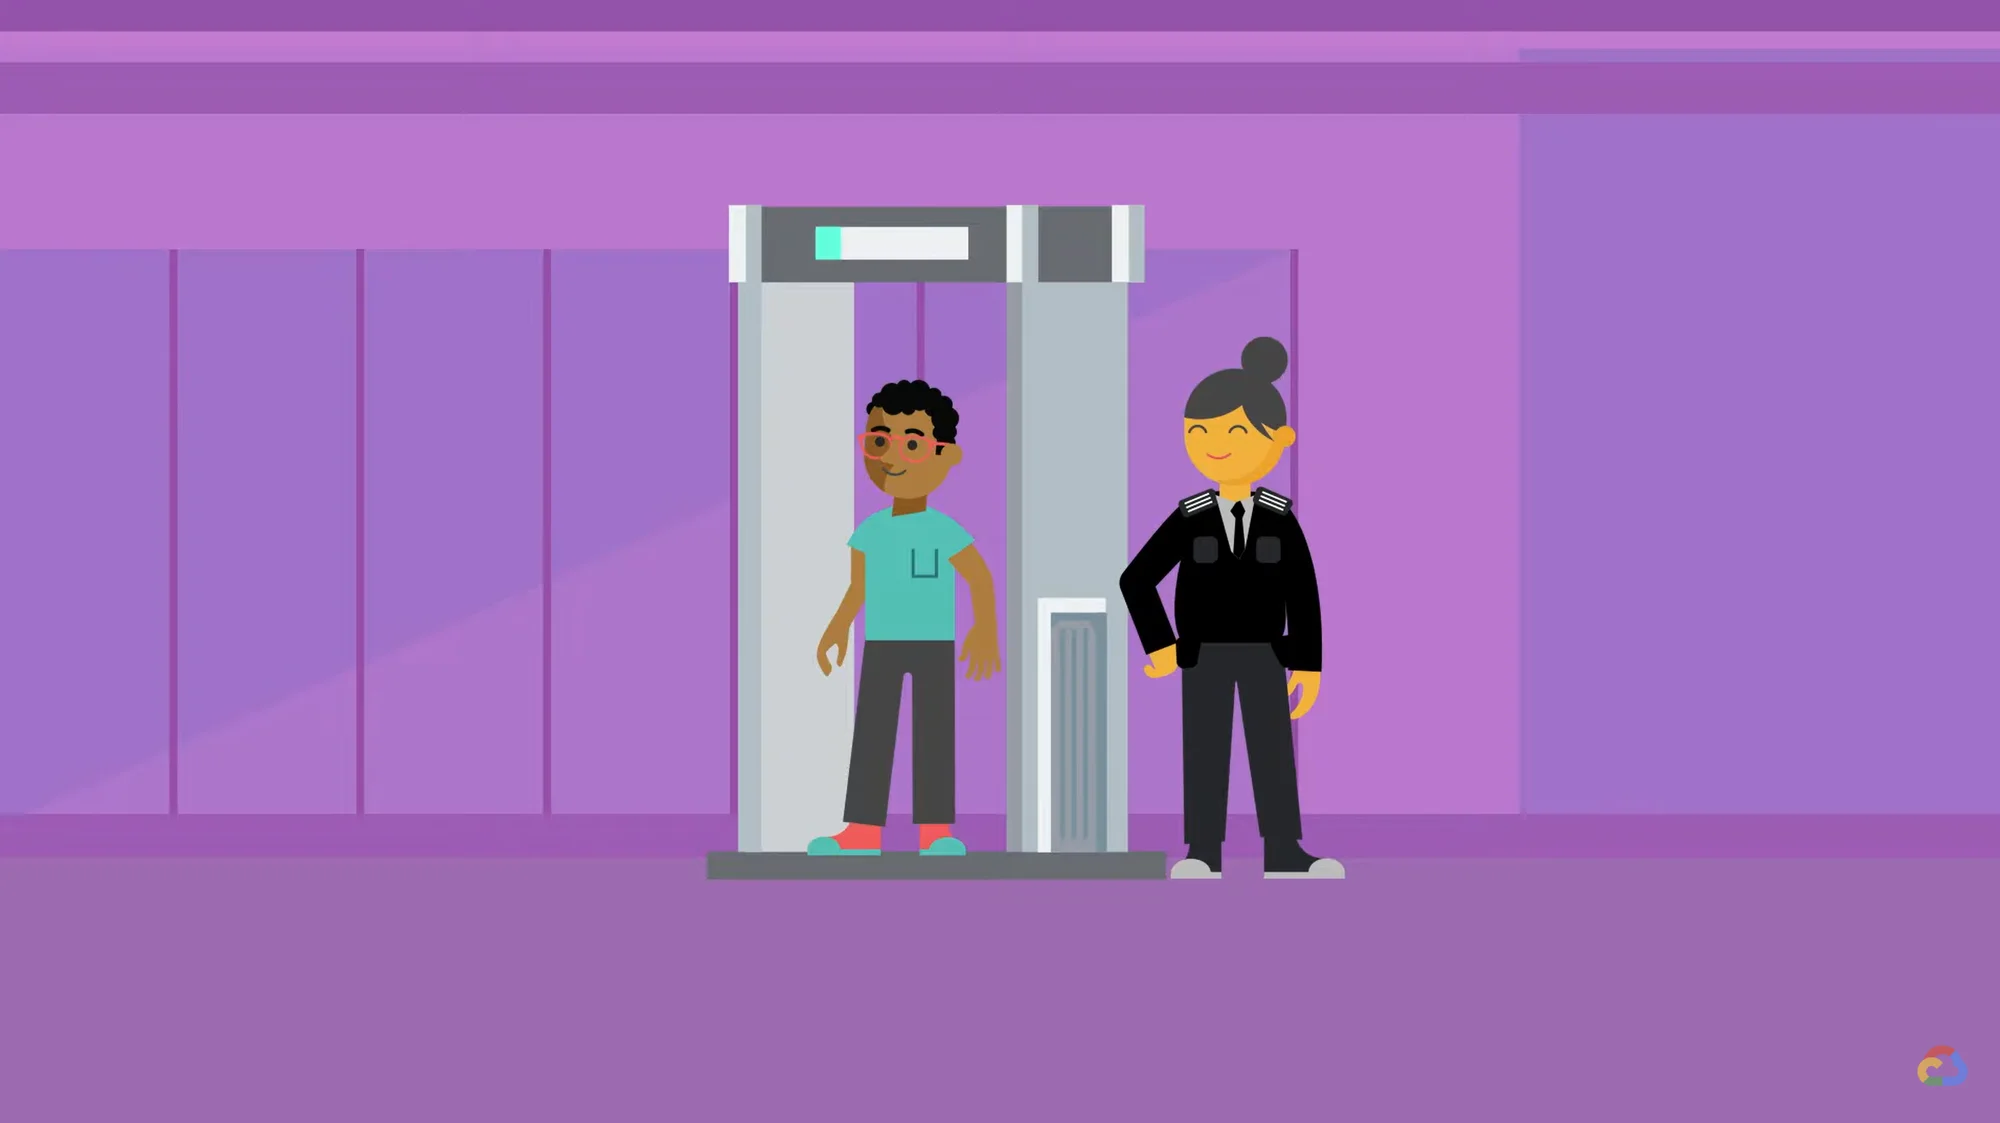 Animated image of a person going through a metal detector under the supervision of a Google staff member.